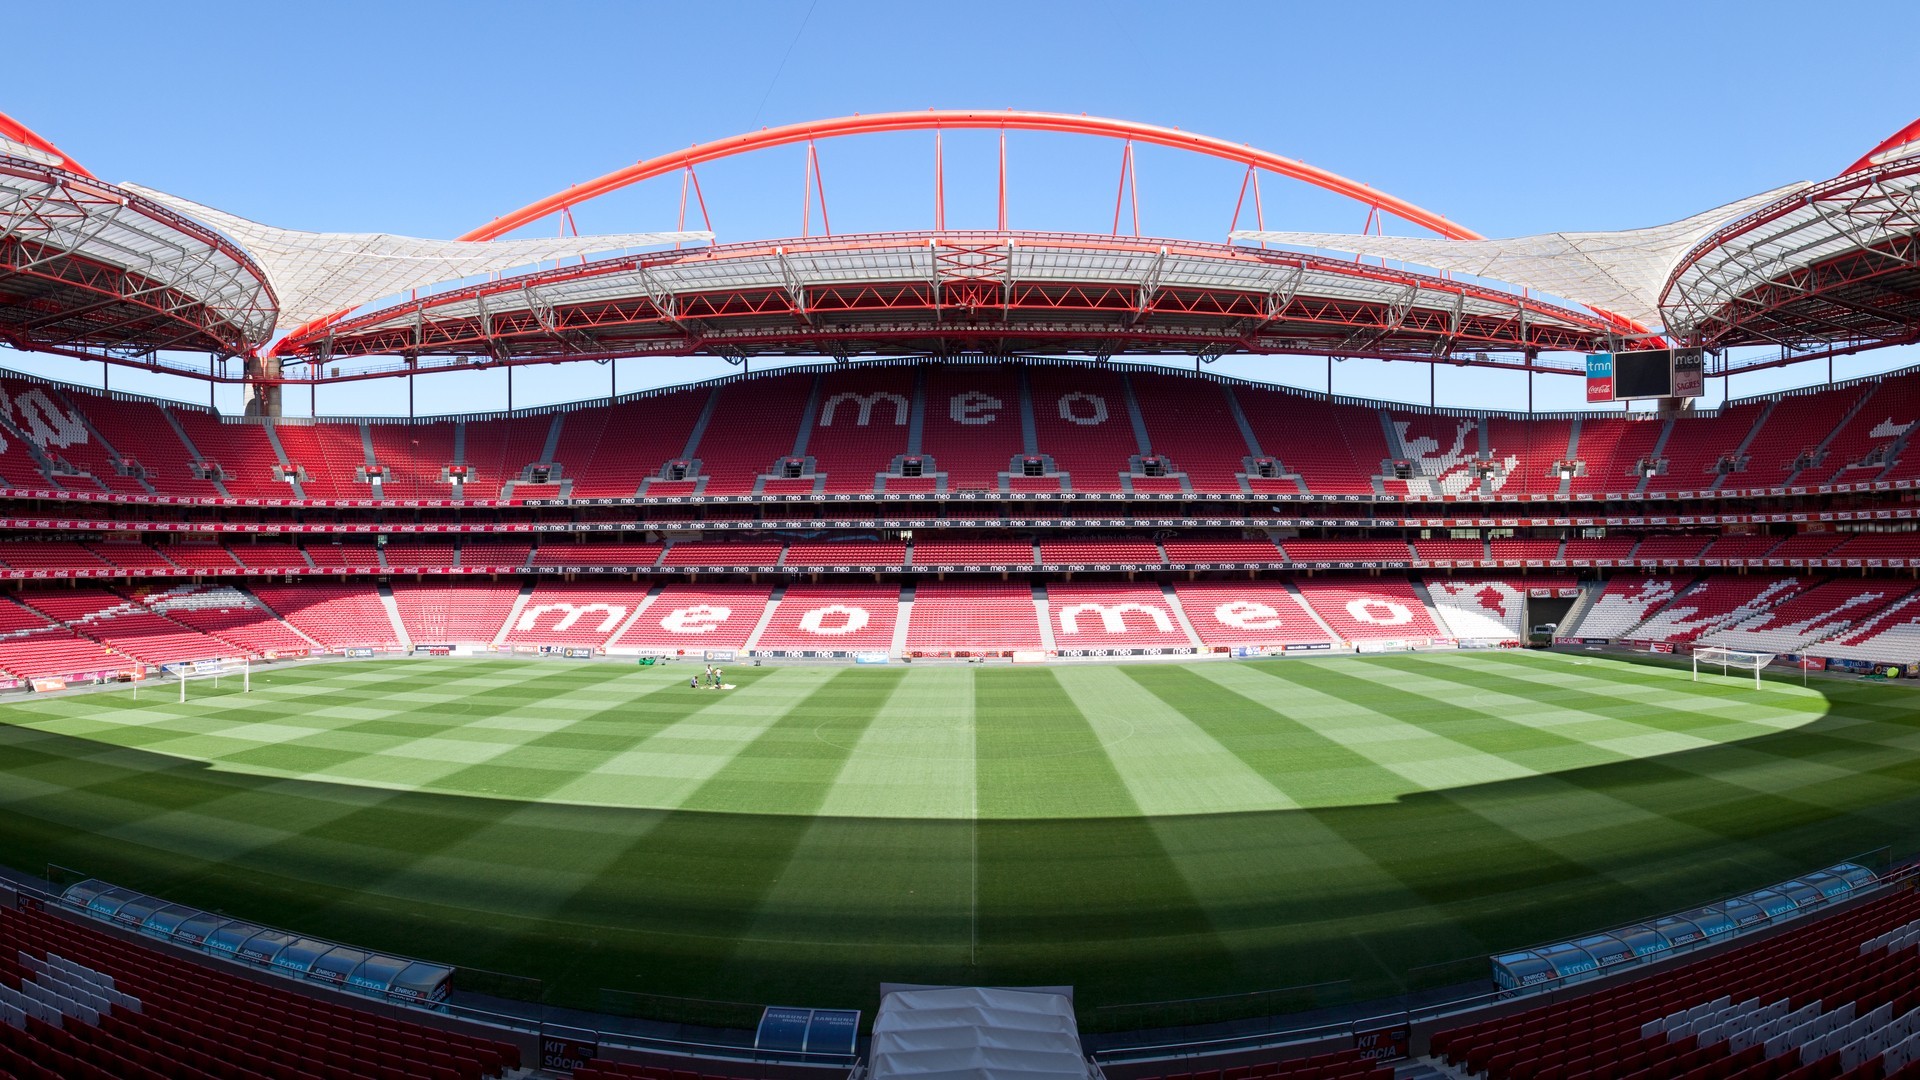 Wallpaper lisbon structure arena s l benfica x px geographical feature sport venue music venue soccer specific stadium baseball park baseball field bullring x